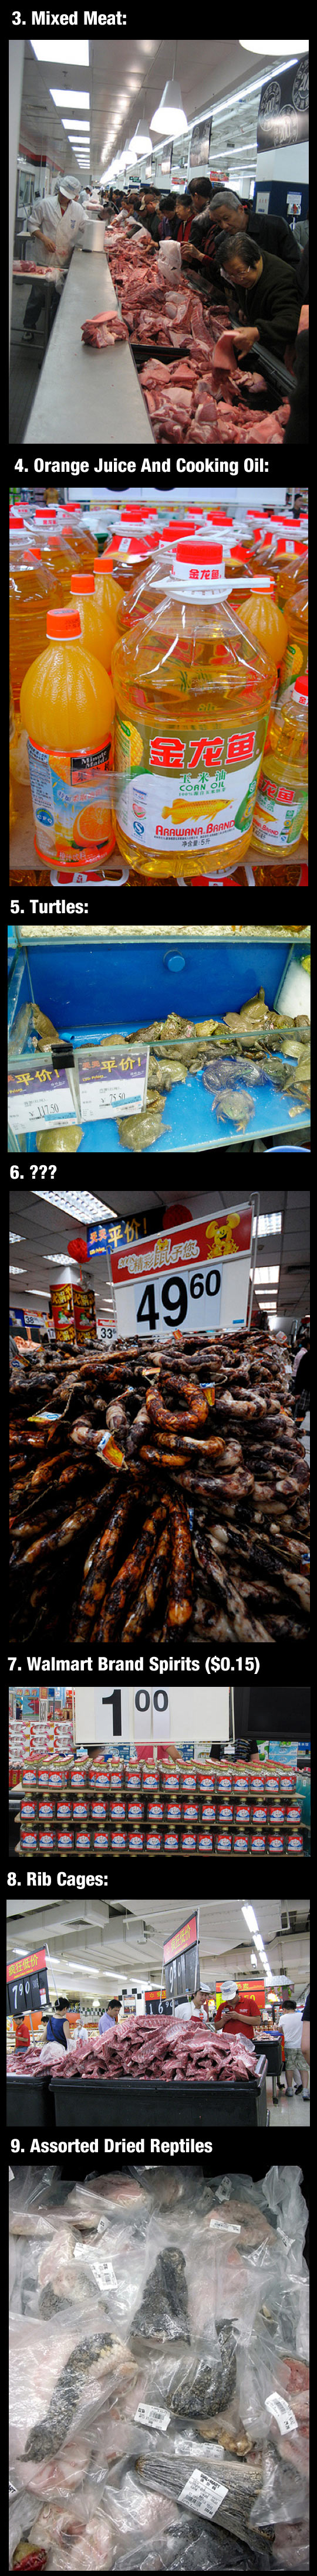 funny-Walmart-China-weird-things-pigs